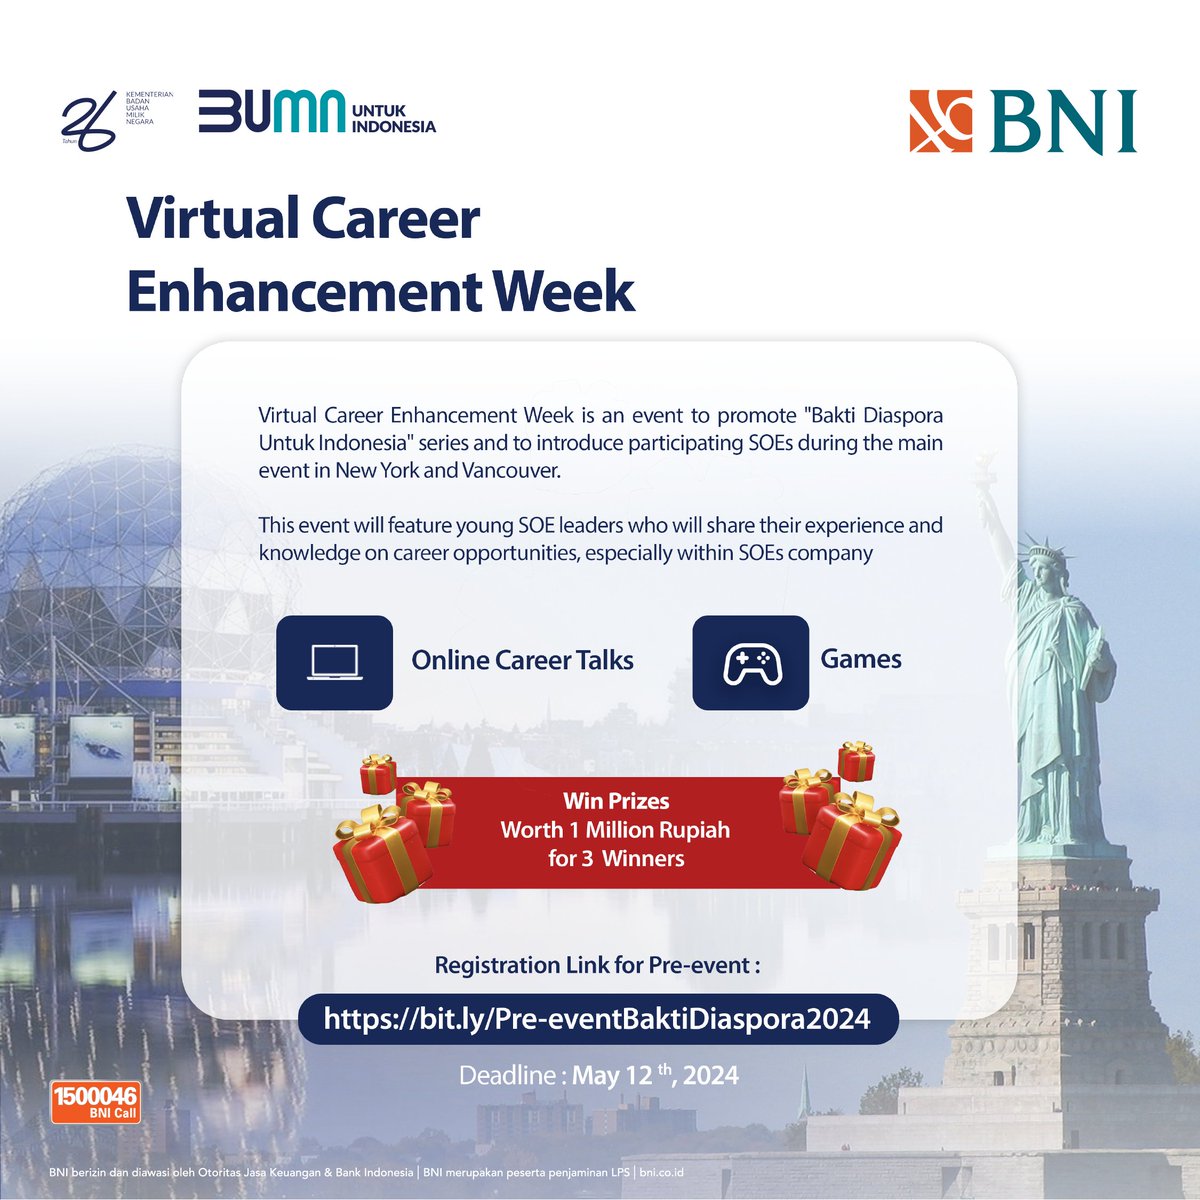 📷📷Calling all Indonesian students across the world! Are you ready to create network with other professional talents from BUMN? Great news for you, because we have extended the registration period of our Virtual Career Enhancement Week (Part of Bakti Diaspora Untuk Indonesia)…